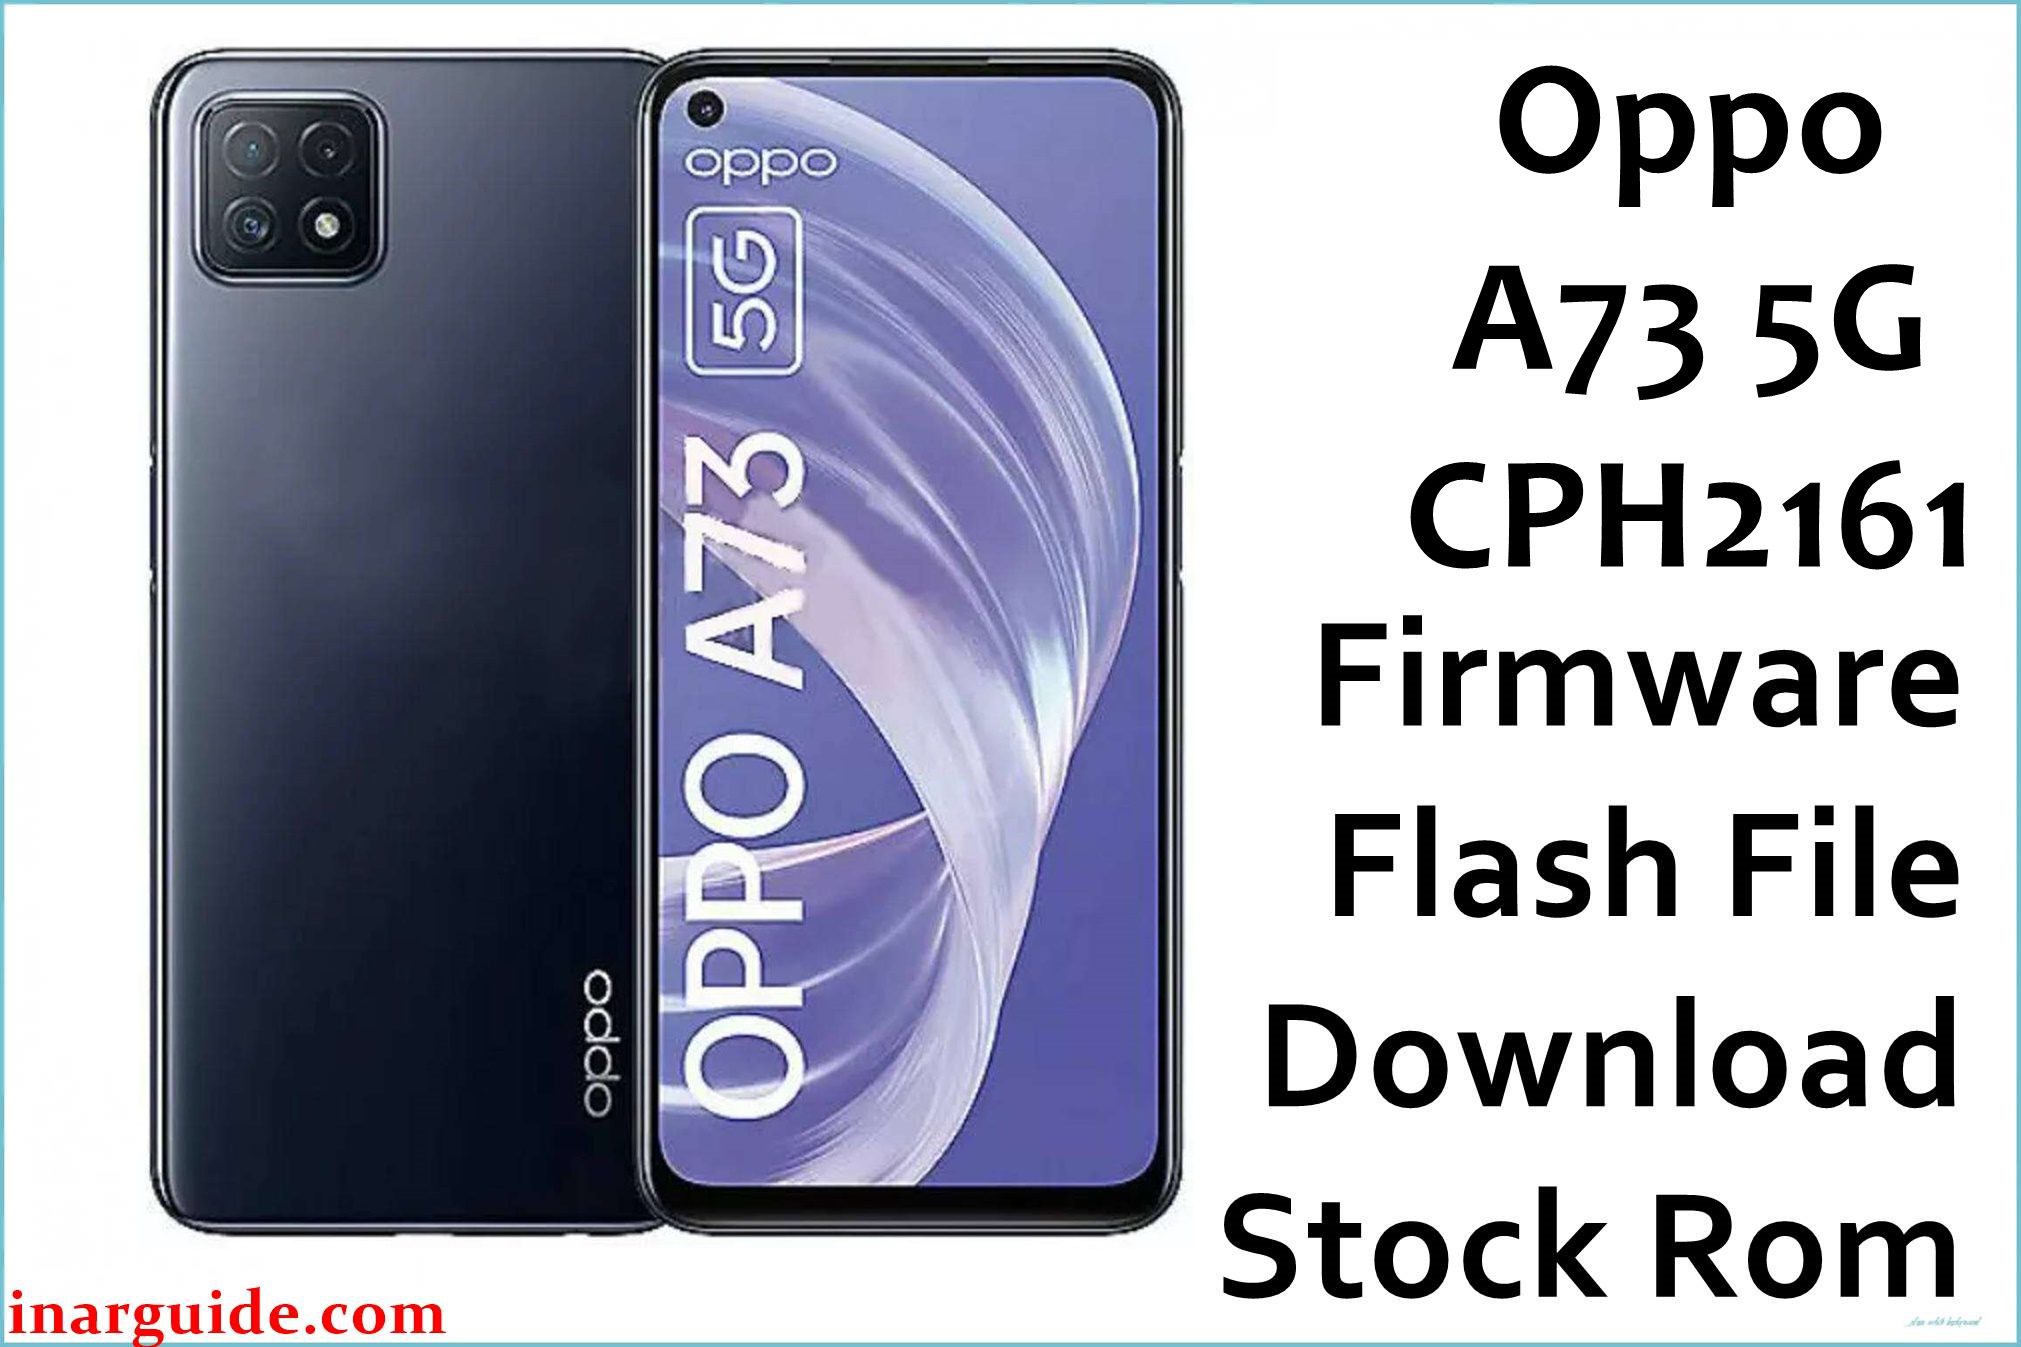 Oppo A73 5G CPH2161 Firmware Flash File Download [Stock Rom]